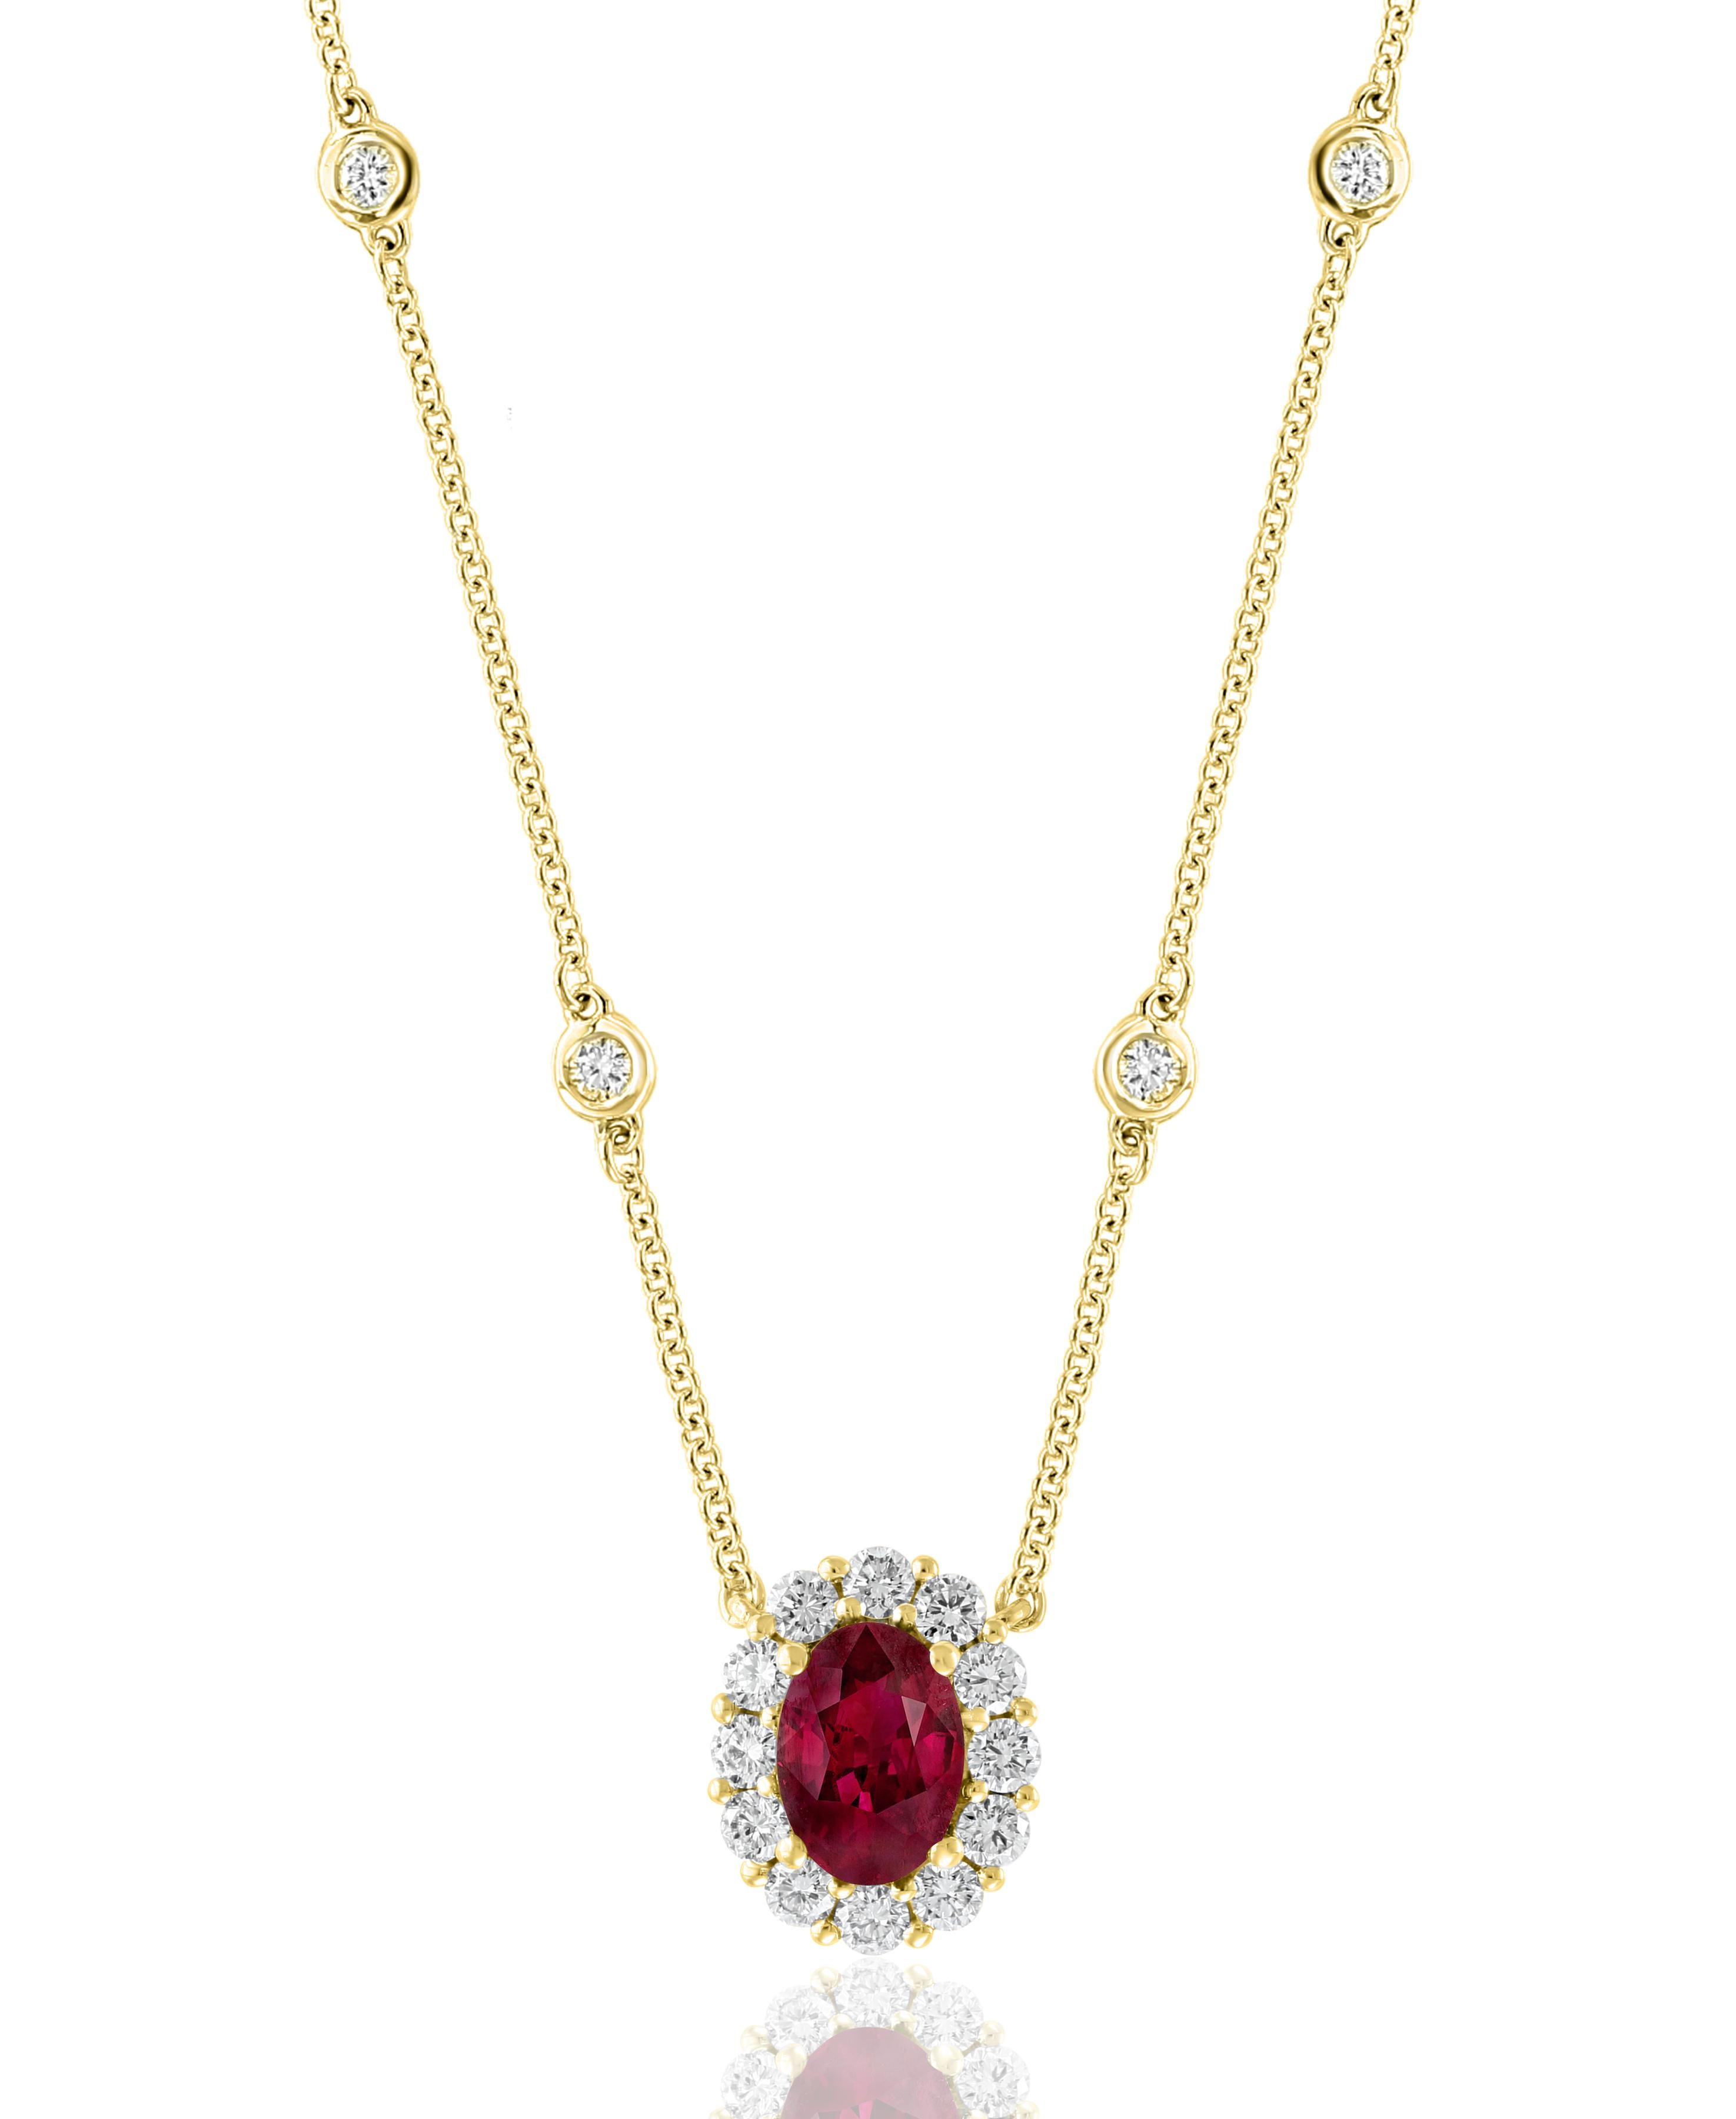 Modern 0.71 Carat Oval Cut Ruby and Diamond Pendant Necklace in 14K Yellow Gold For Sale